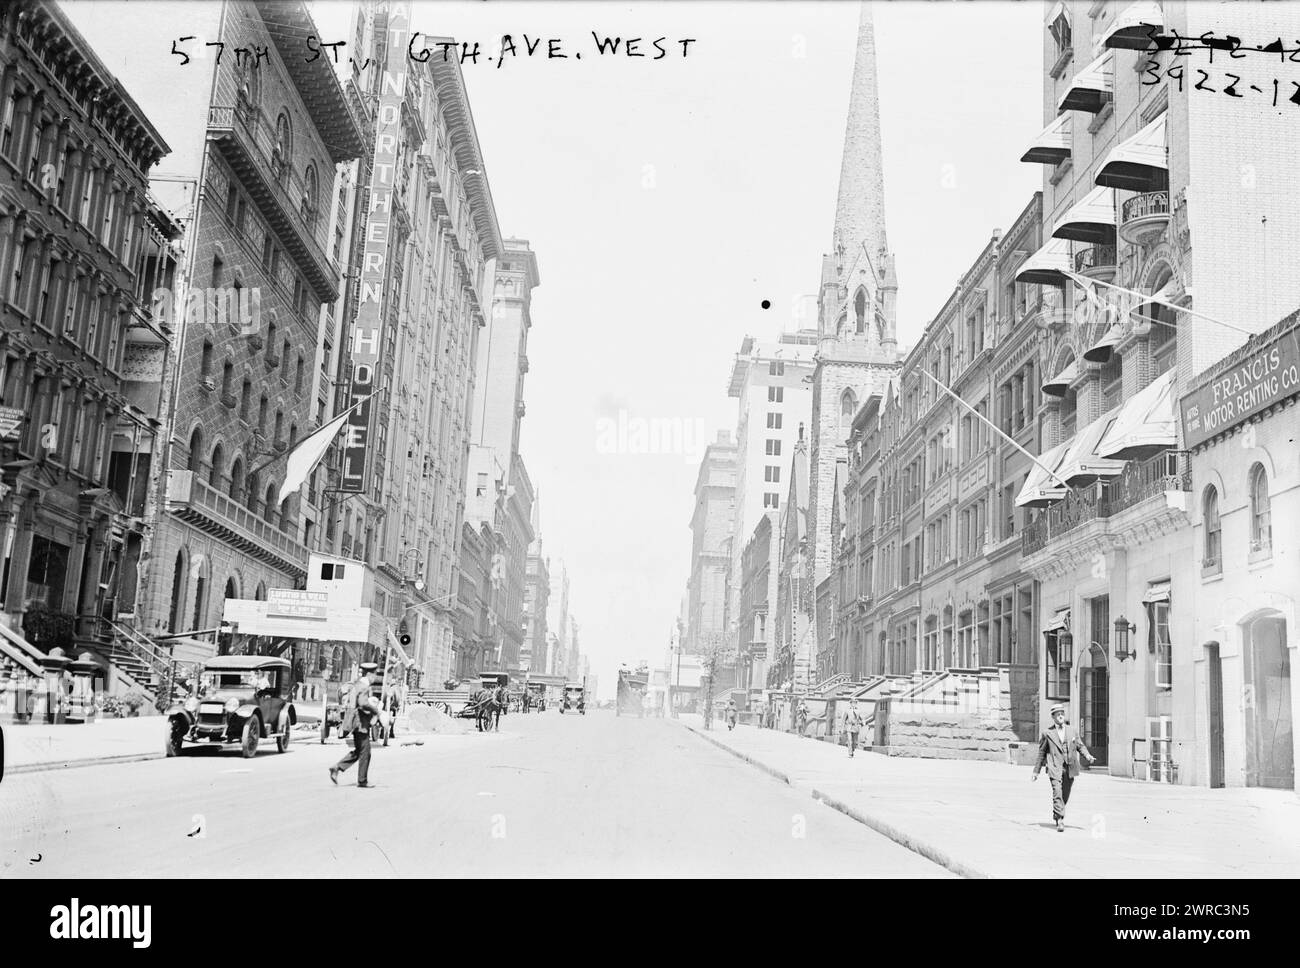 57th St., 6th Ave. West, Photograph shows the site of Steinway Hall, New York City, probably taken at the time Steinway Sons purchased the site for a new building. Zoning issues delayed construction until 1914-1925. The steeple of Calvary Baptist Church is visible., 1916, Glass negatives, 1 negative: glass Stock Photo